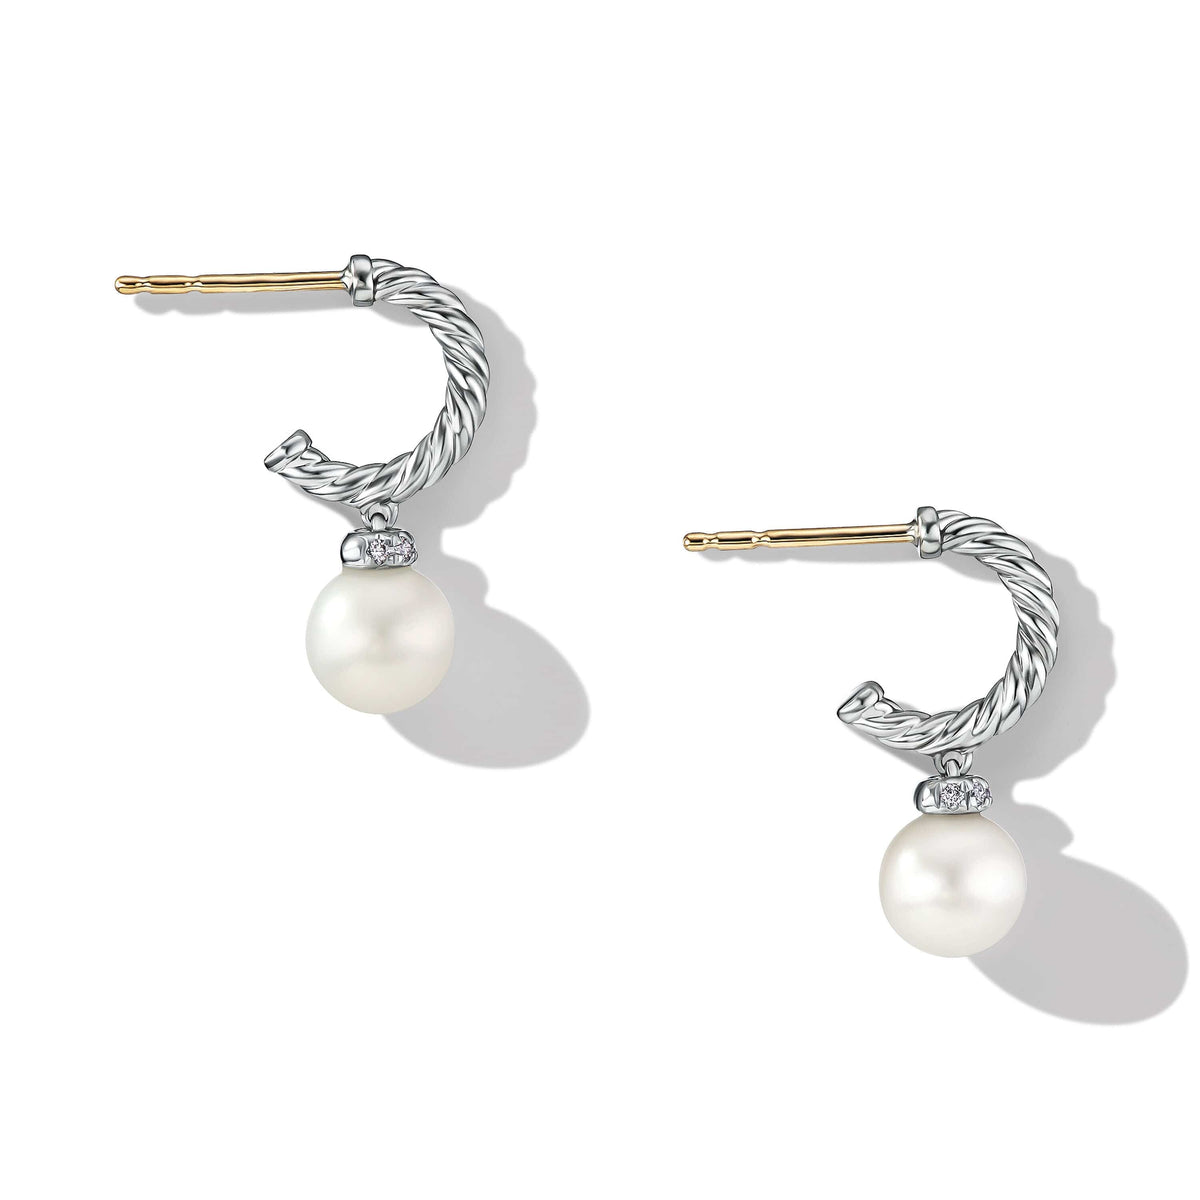 Pearl and Pavé Solari Drop Earrings in Sterling Silver with Diamonds